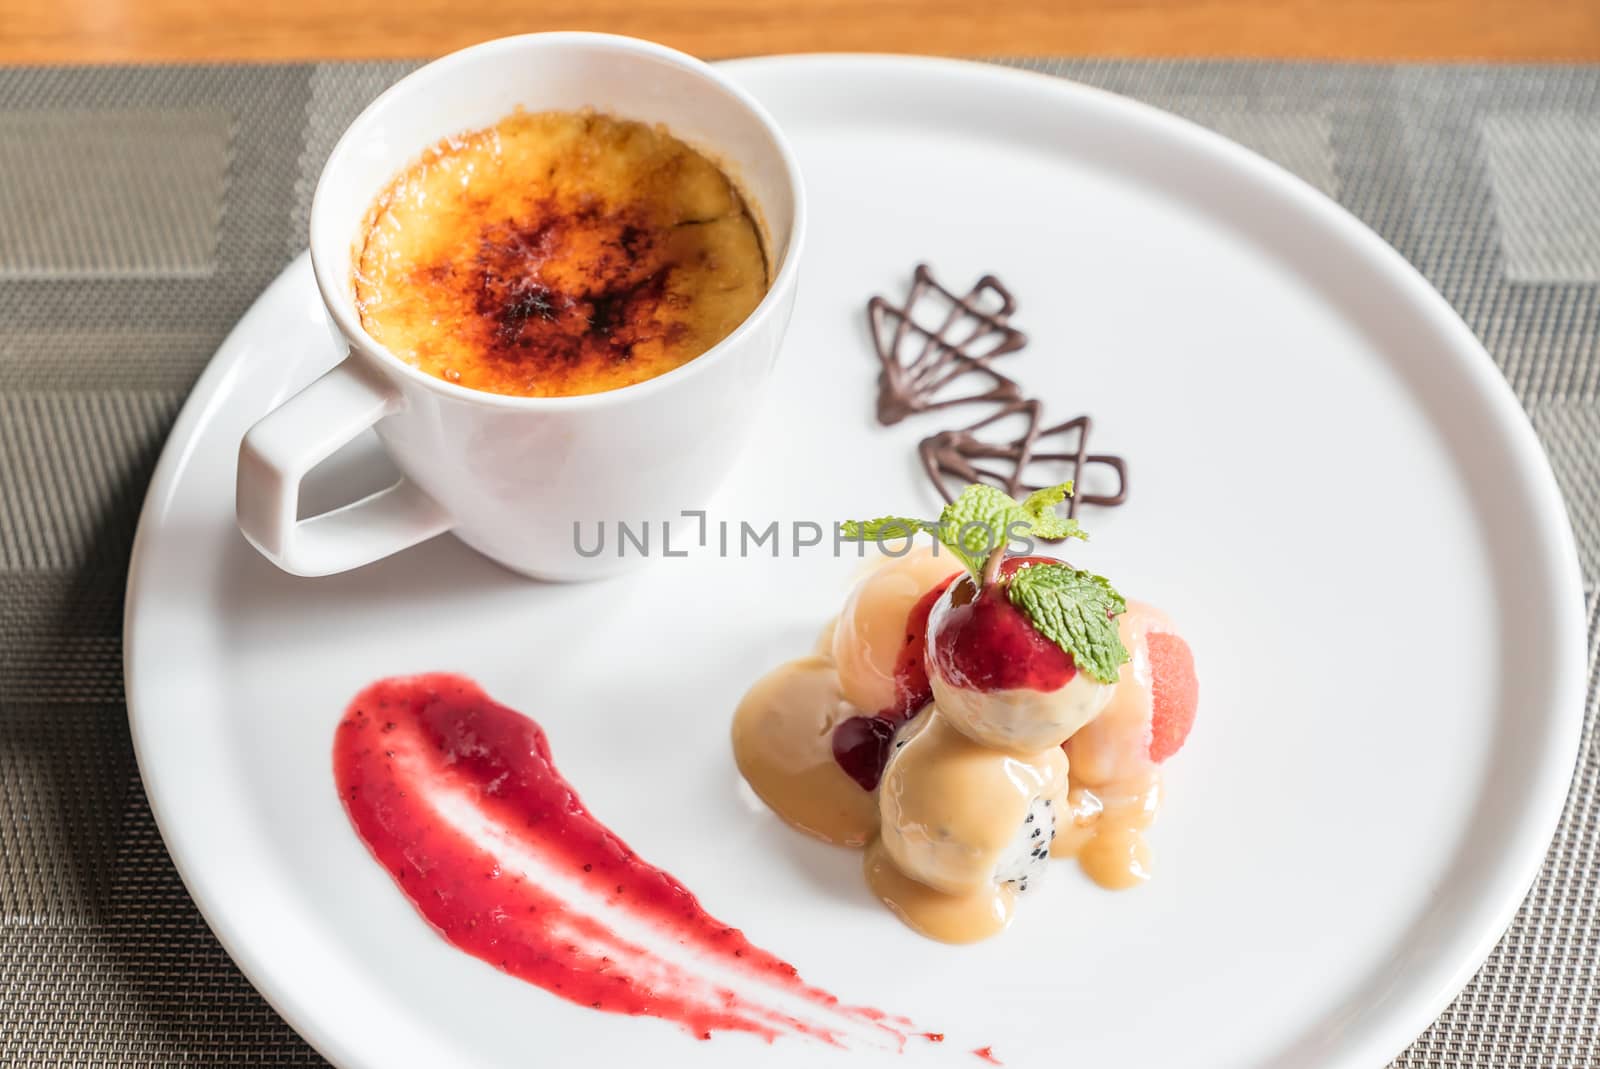 Creme Brulee with fresh fruit and chocolate